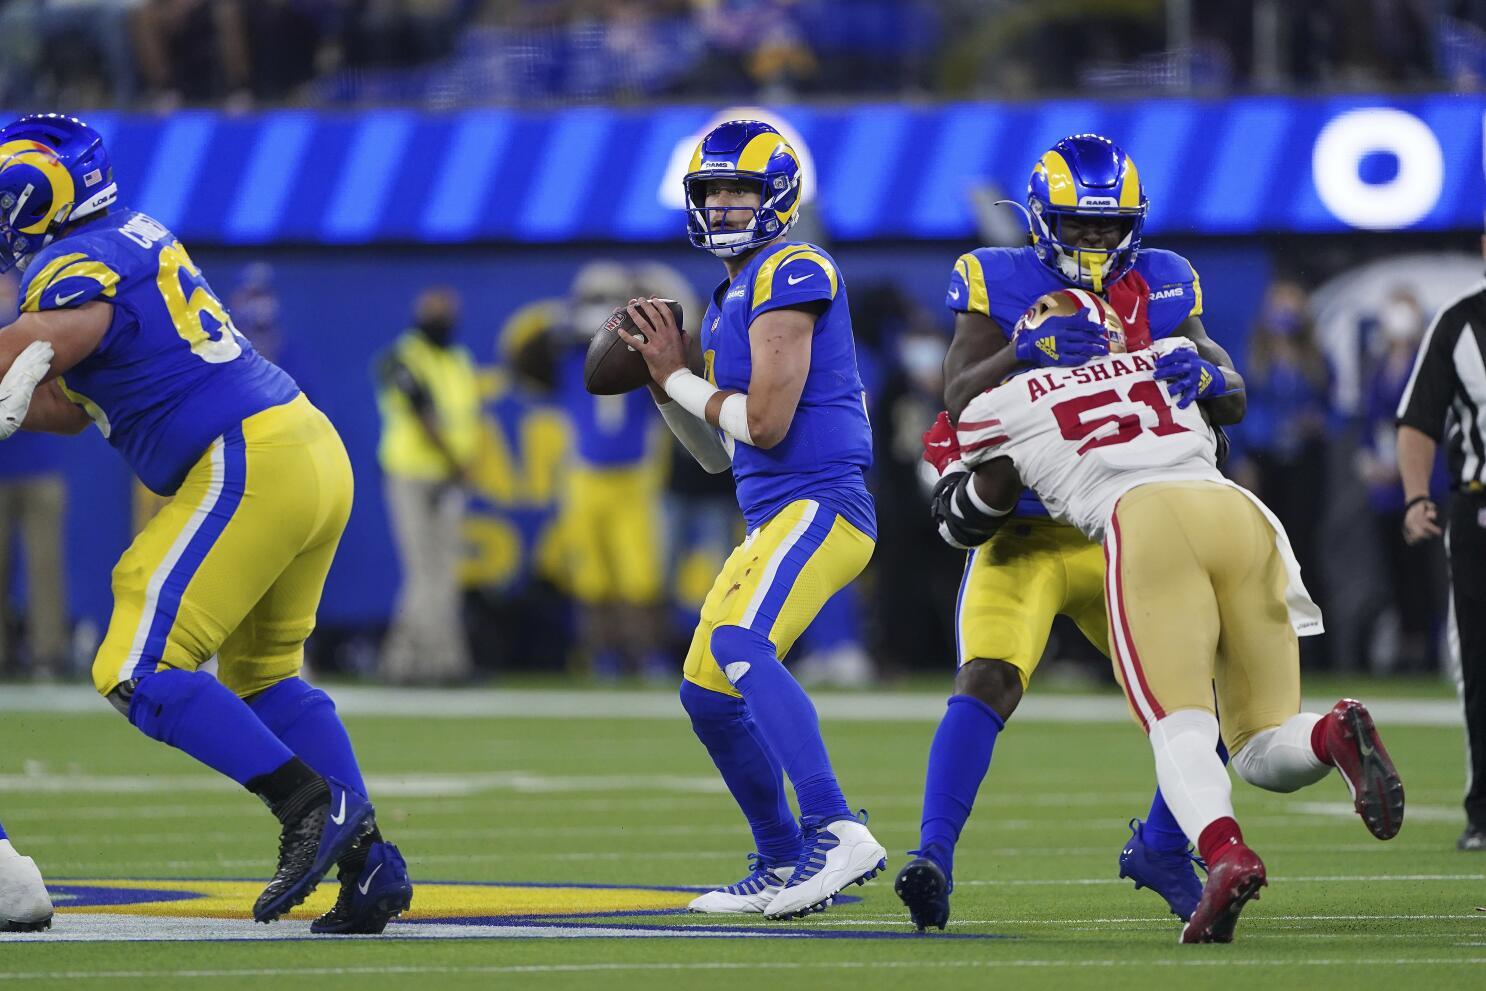 50 million watched Sunday's Rams-49ers NFL playoff game on Fox